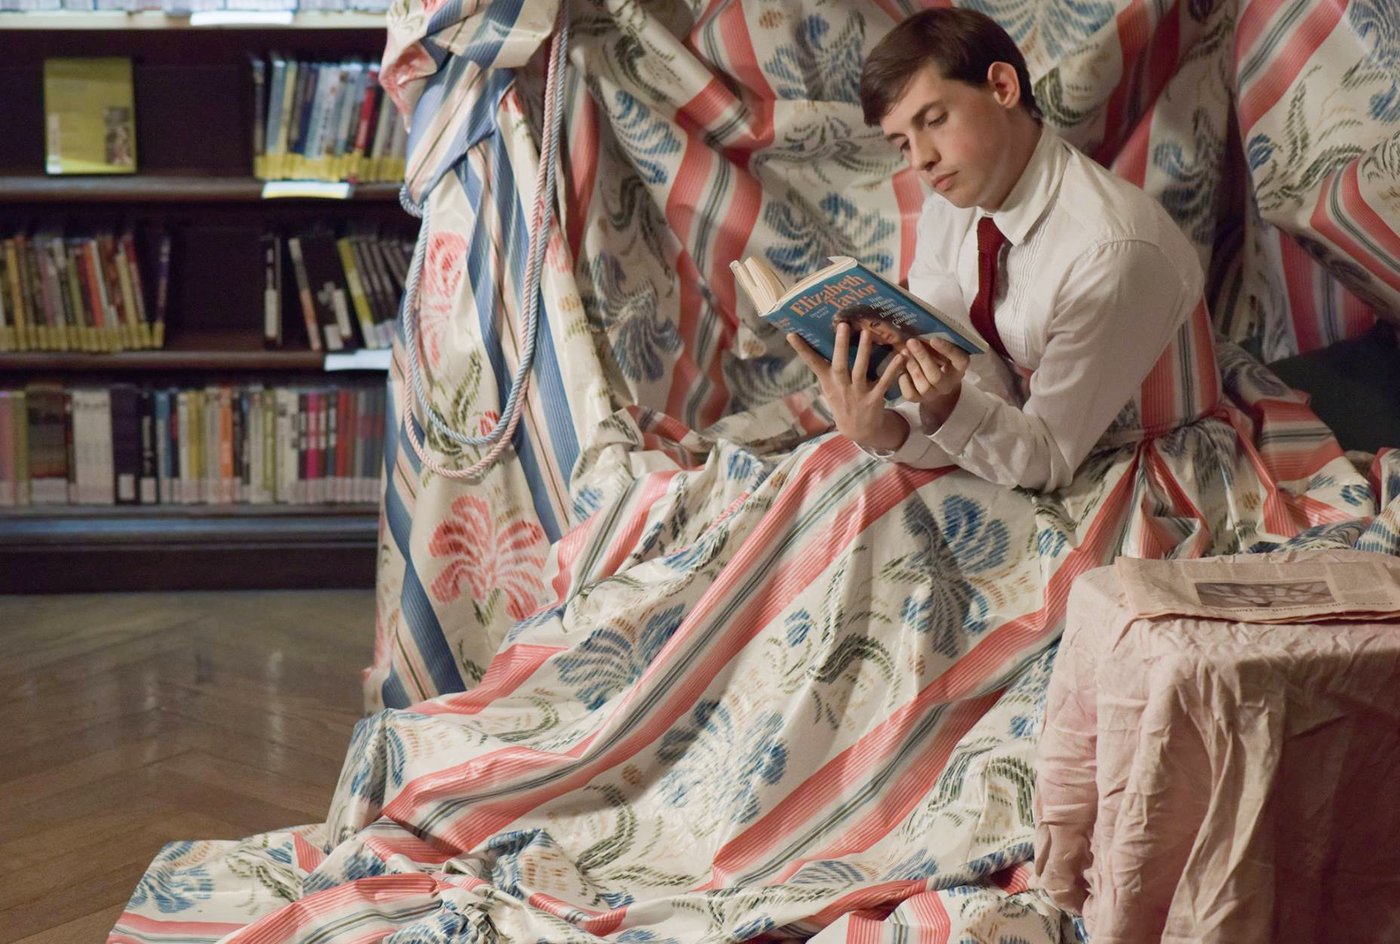 Moritz Gottschalk wears a white shirt and red tie and sits reading a book about Elizabeth Taylor, wrapped in thick colourful fabric in the library's reading room.